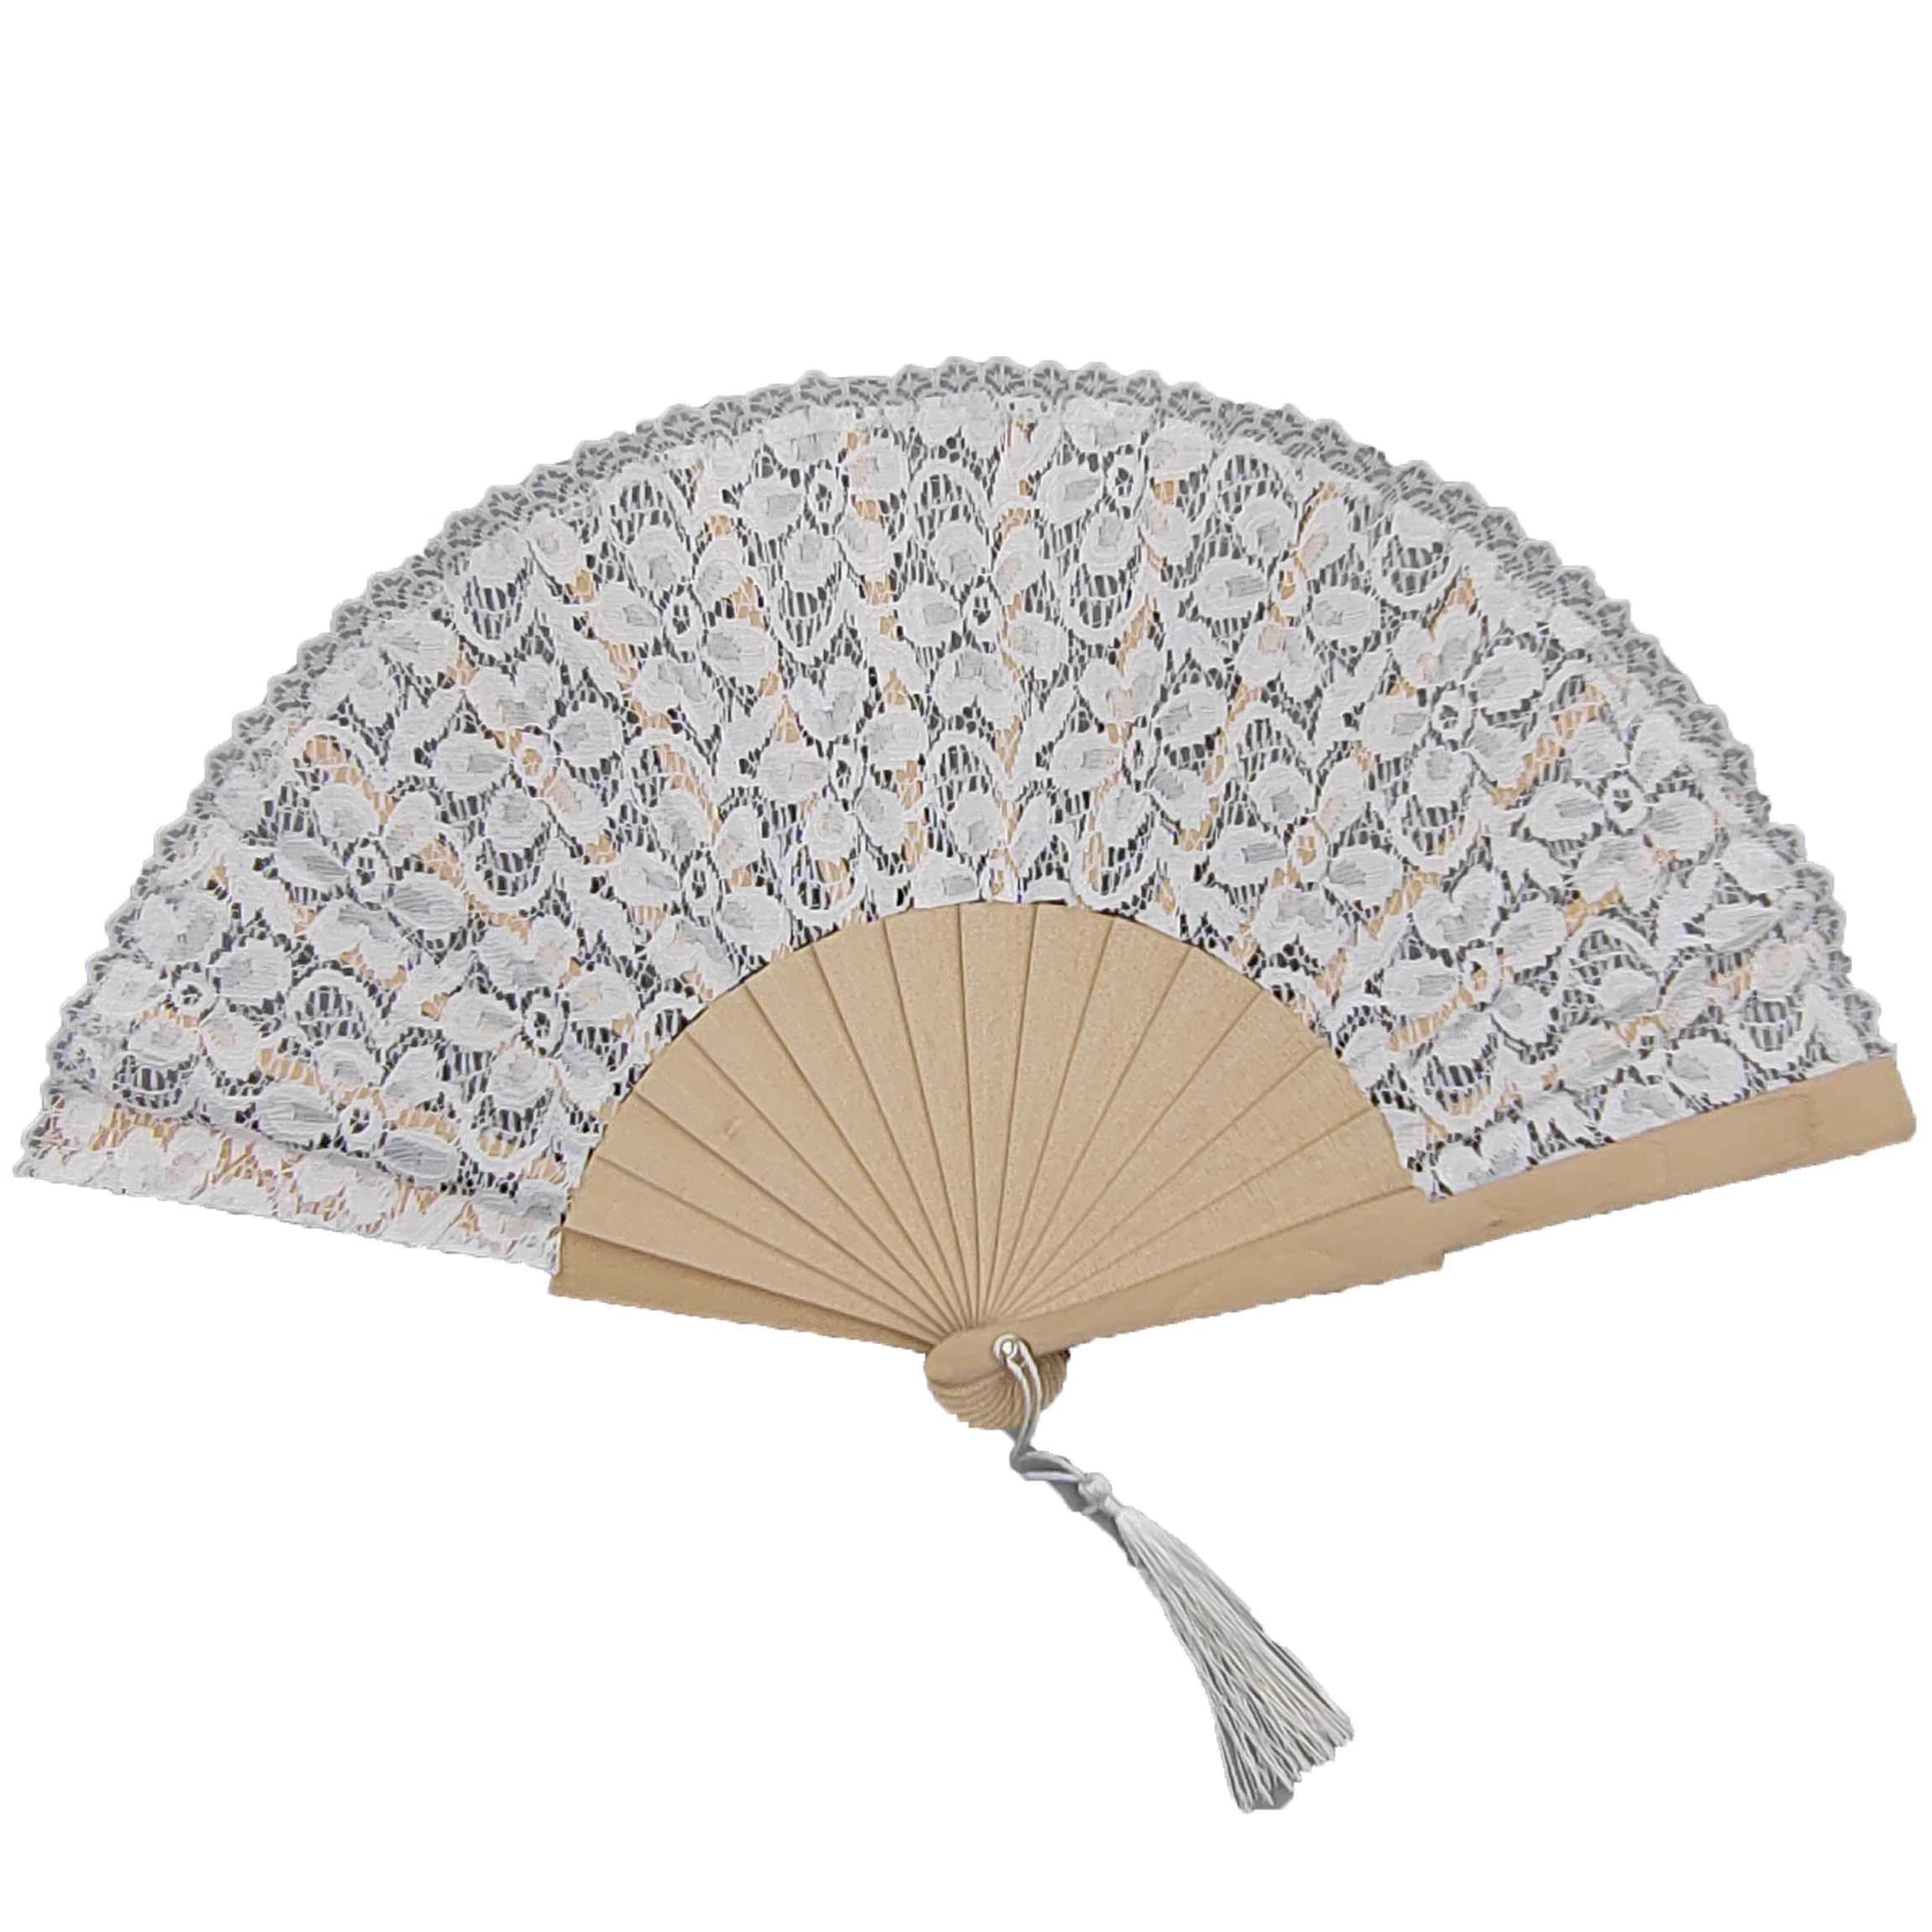 Customize Lace Hand Fans of Various Colors Wood/Plastic Ribs and Lace Fabric Hand Fan for Women